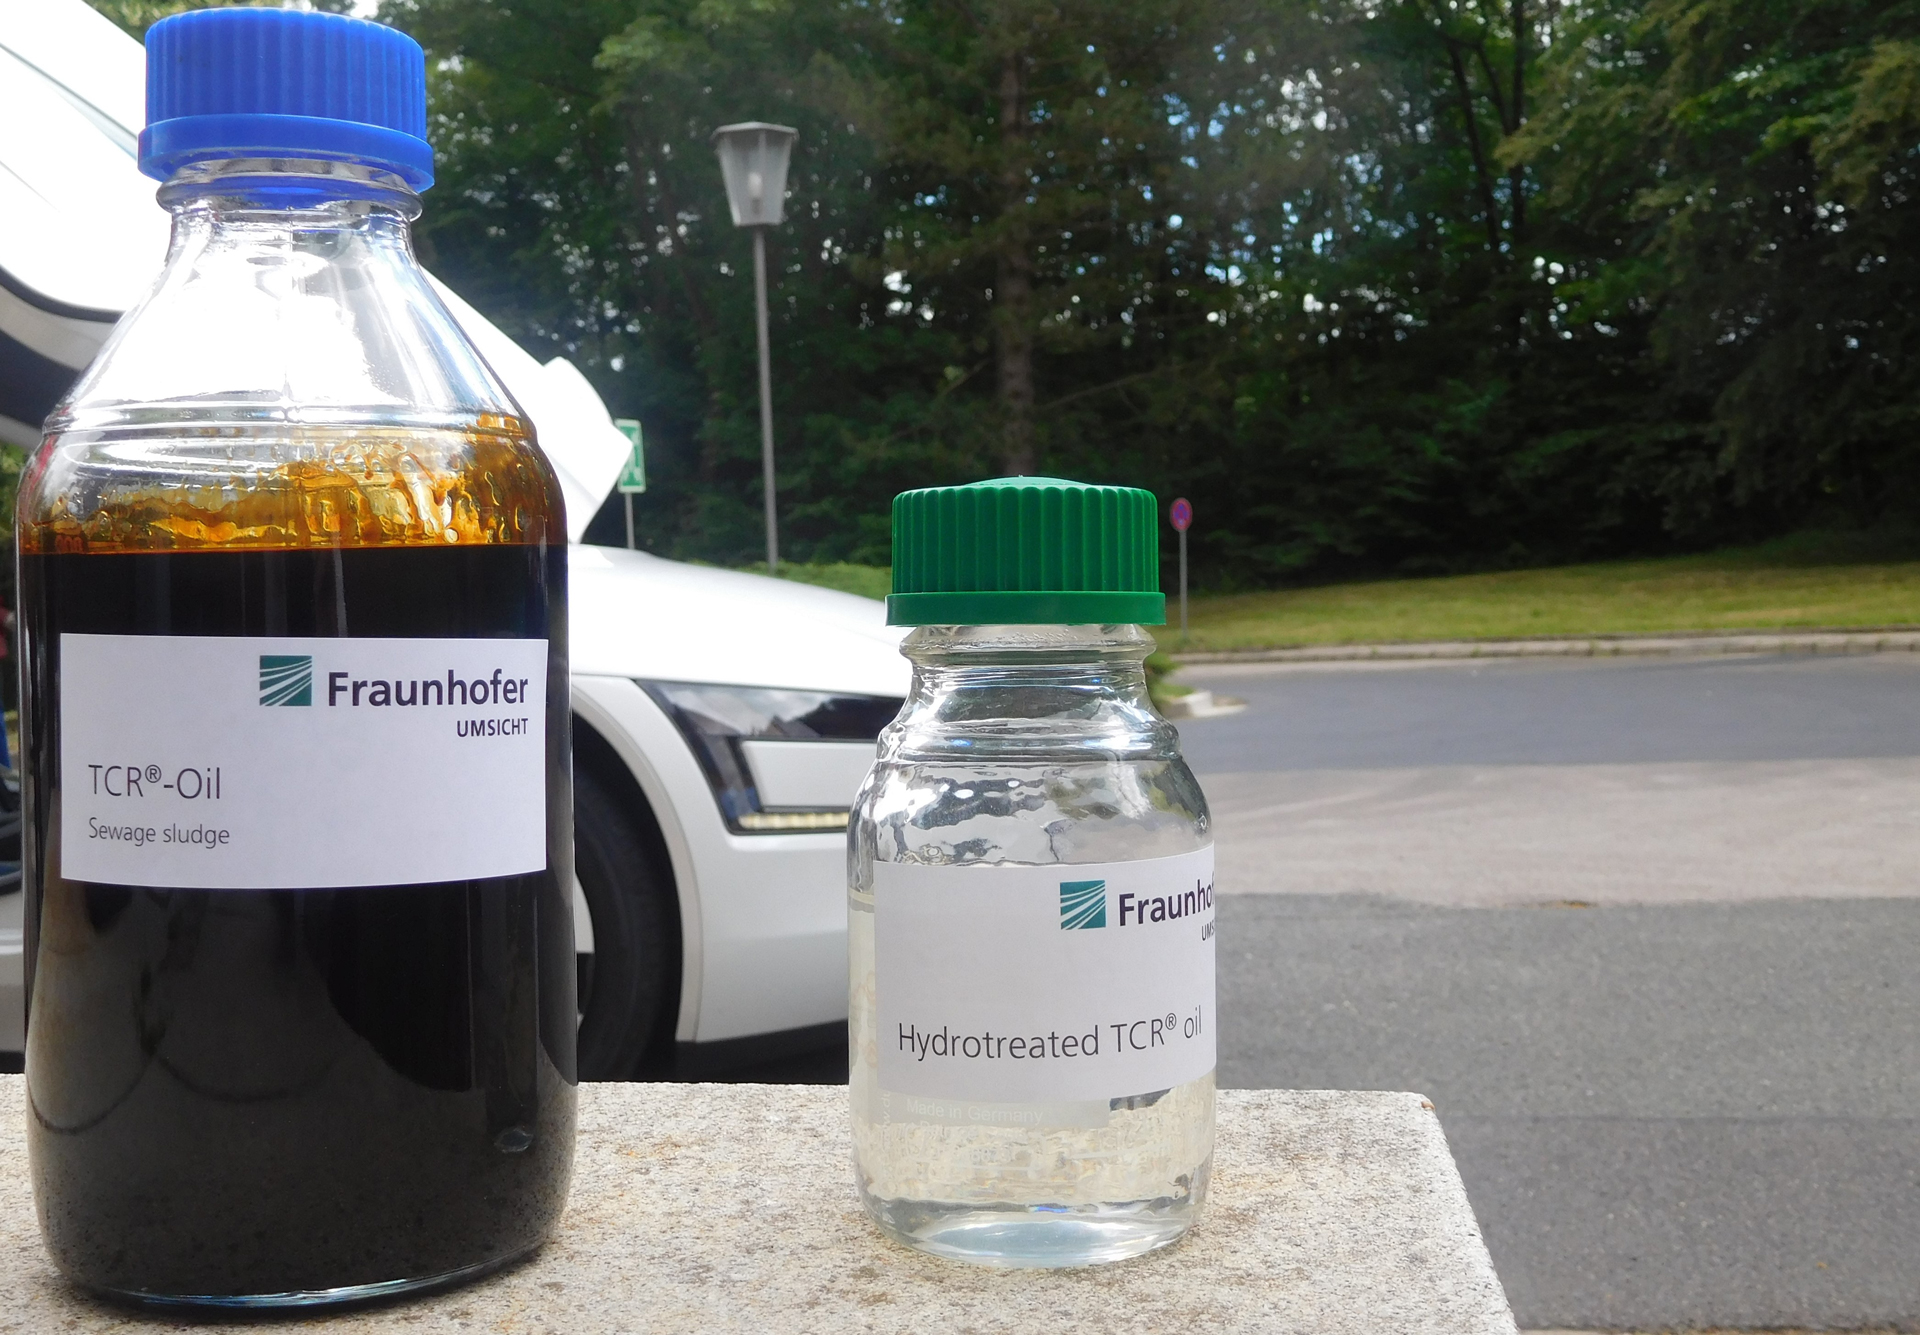 Study of the consumer perceptions about synthetic fuels